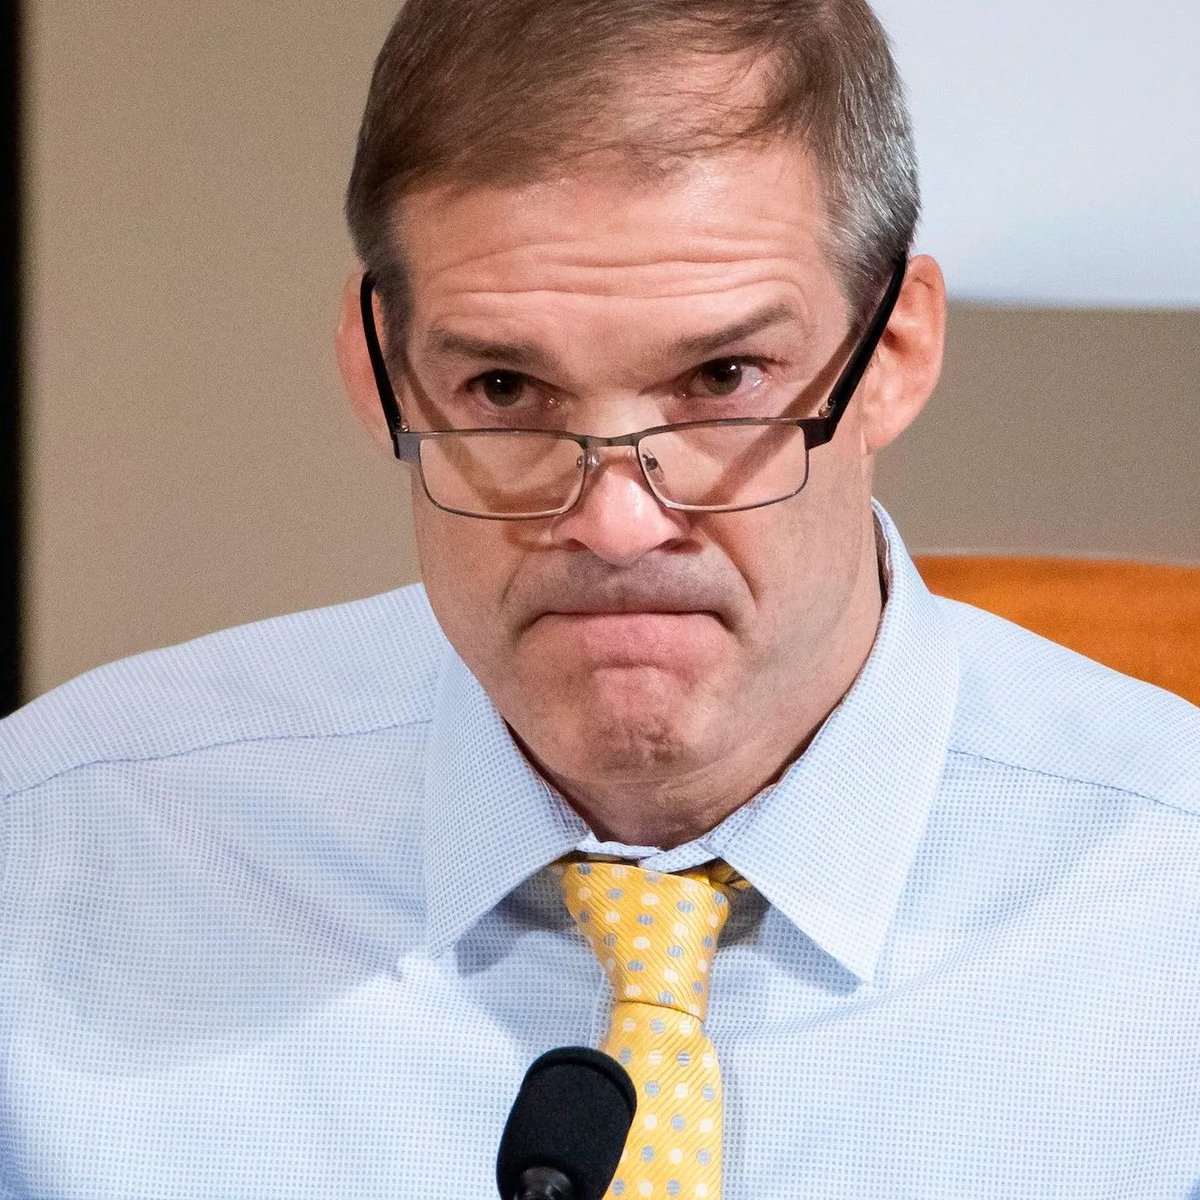 Jim Jordan's disgraceful and shocking kangaroo court has spent the entire time delegitimizing our government and our institutions in a disgusting display of debased Trump worship. The Republican Party is now simply a cult of personality. Jordan never even passed the bar. https://t.co/RsEZhHNKX9